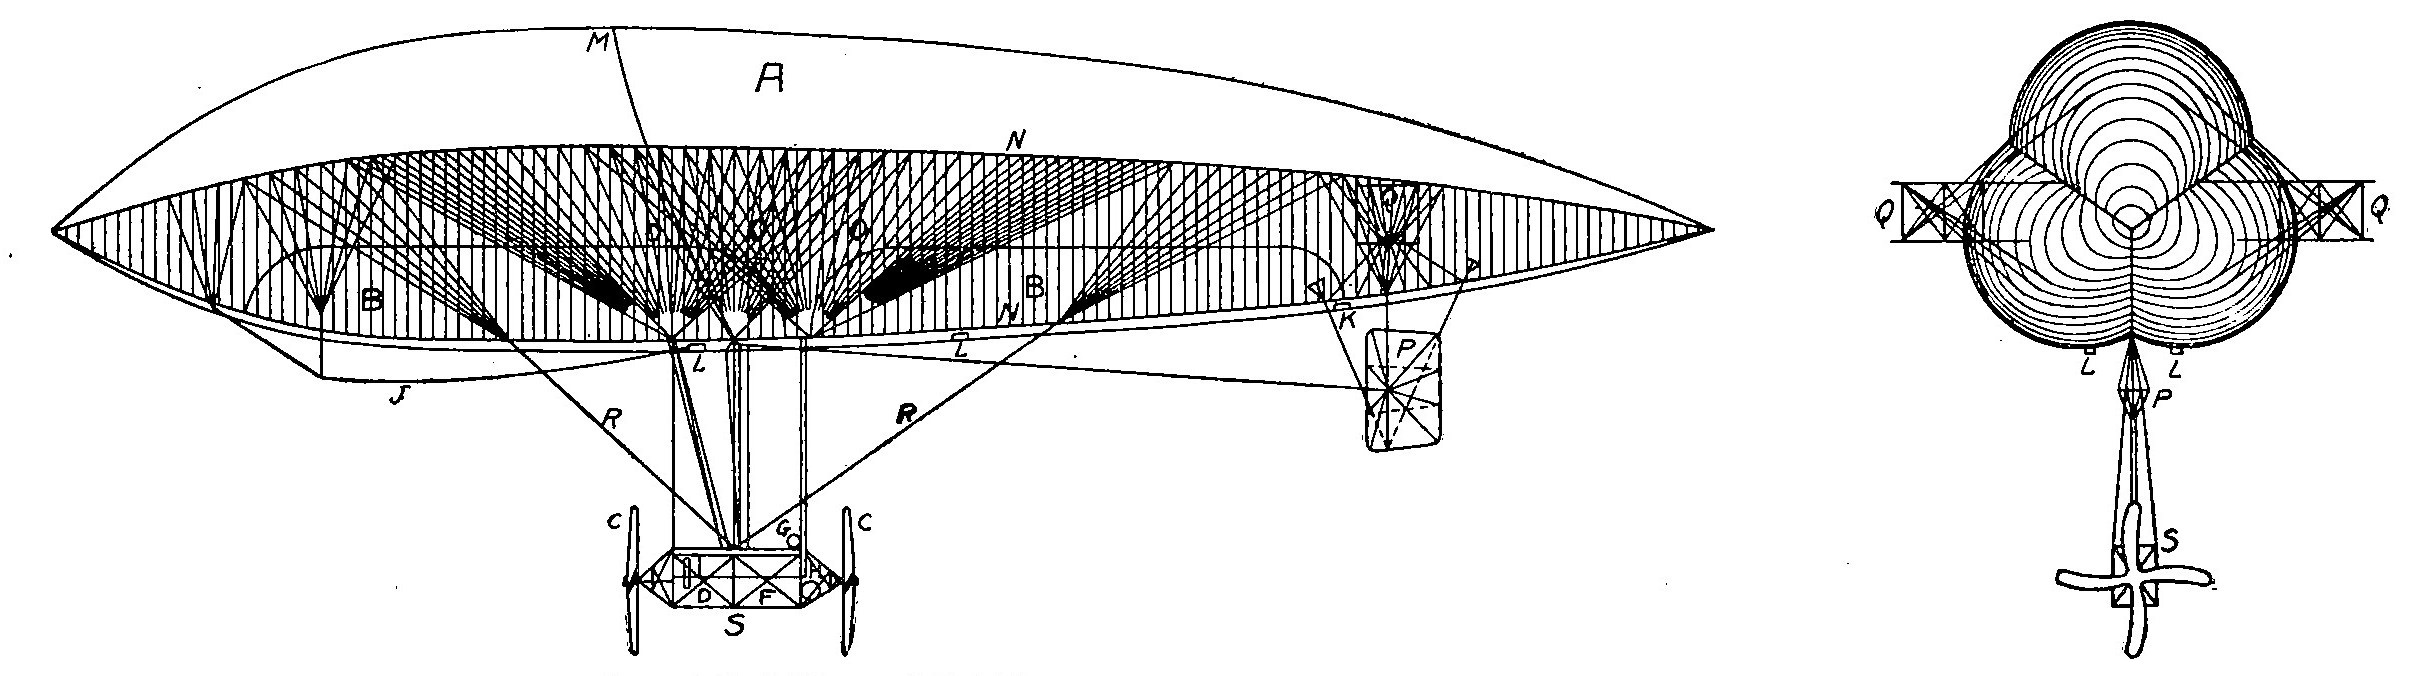 Fig. 21. Side and End Views of British Astra-Torres Dirigible Used for Anti-Submarine Patrol Service